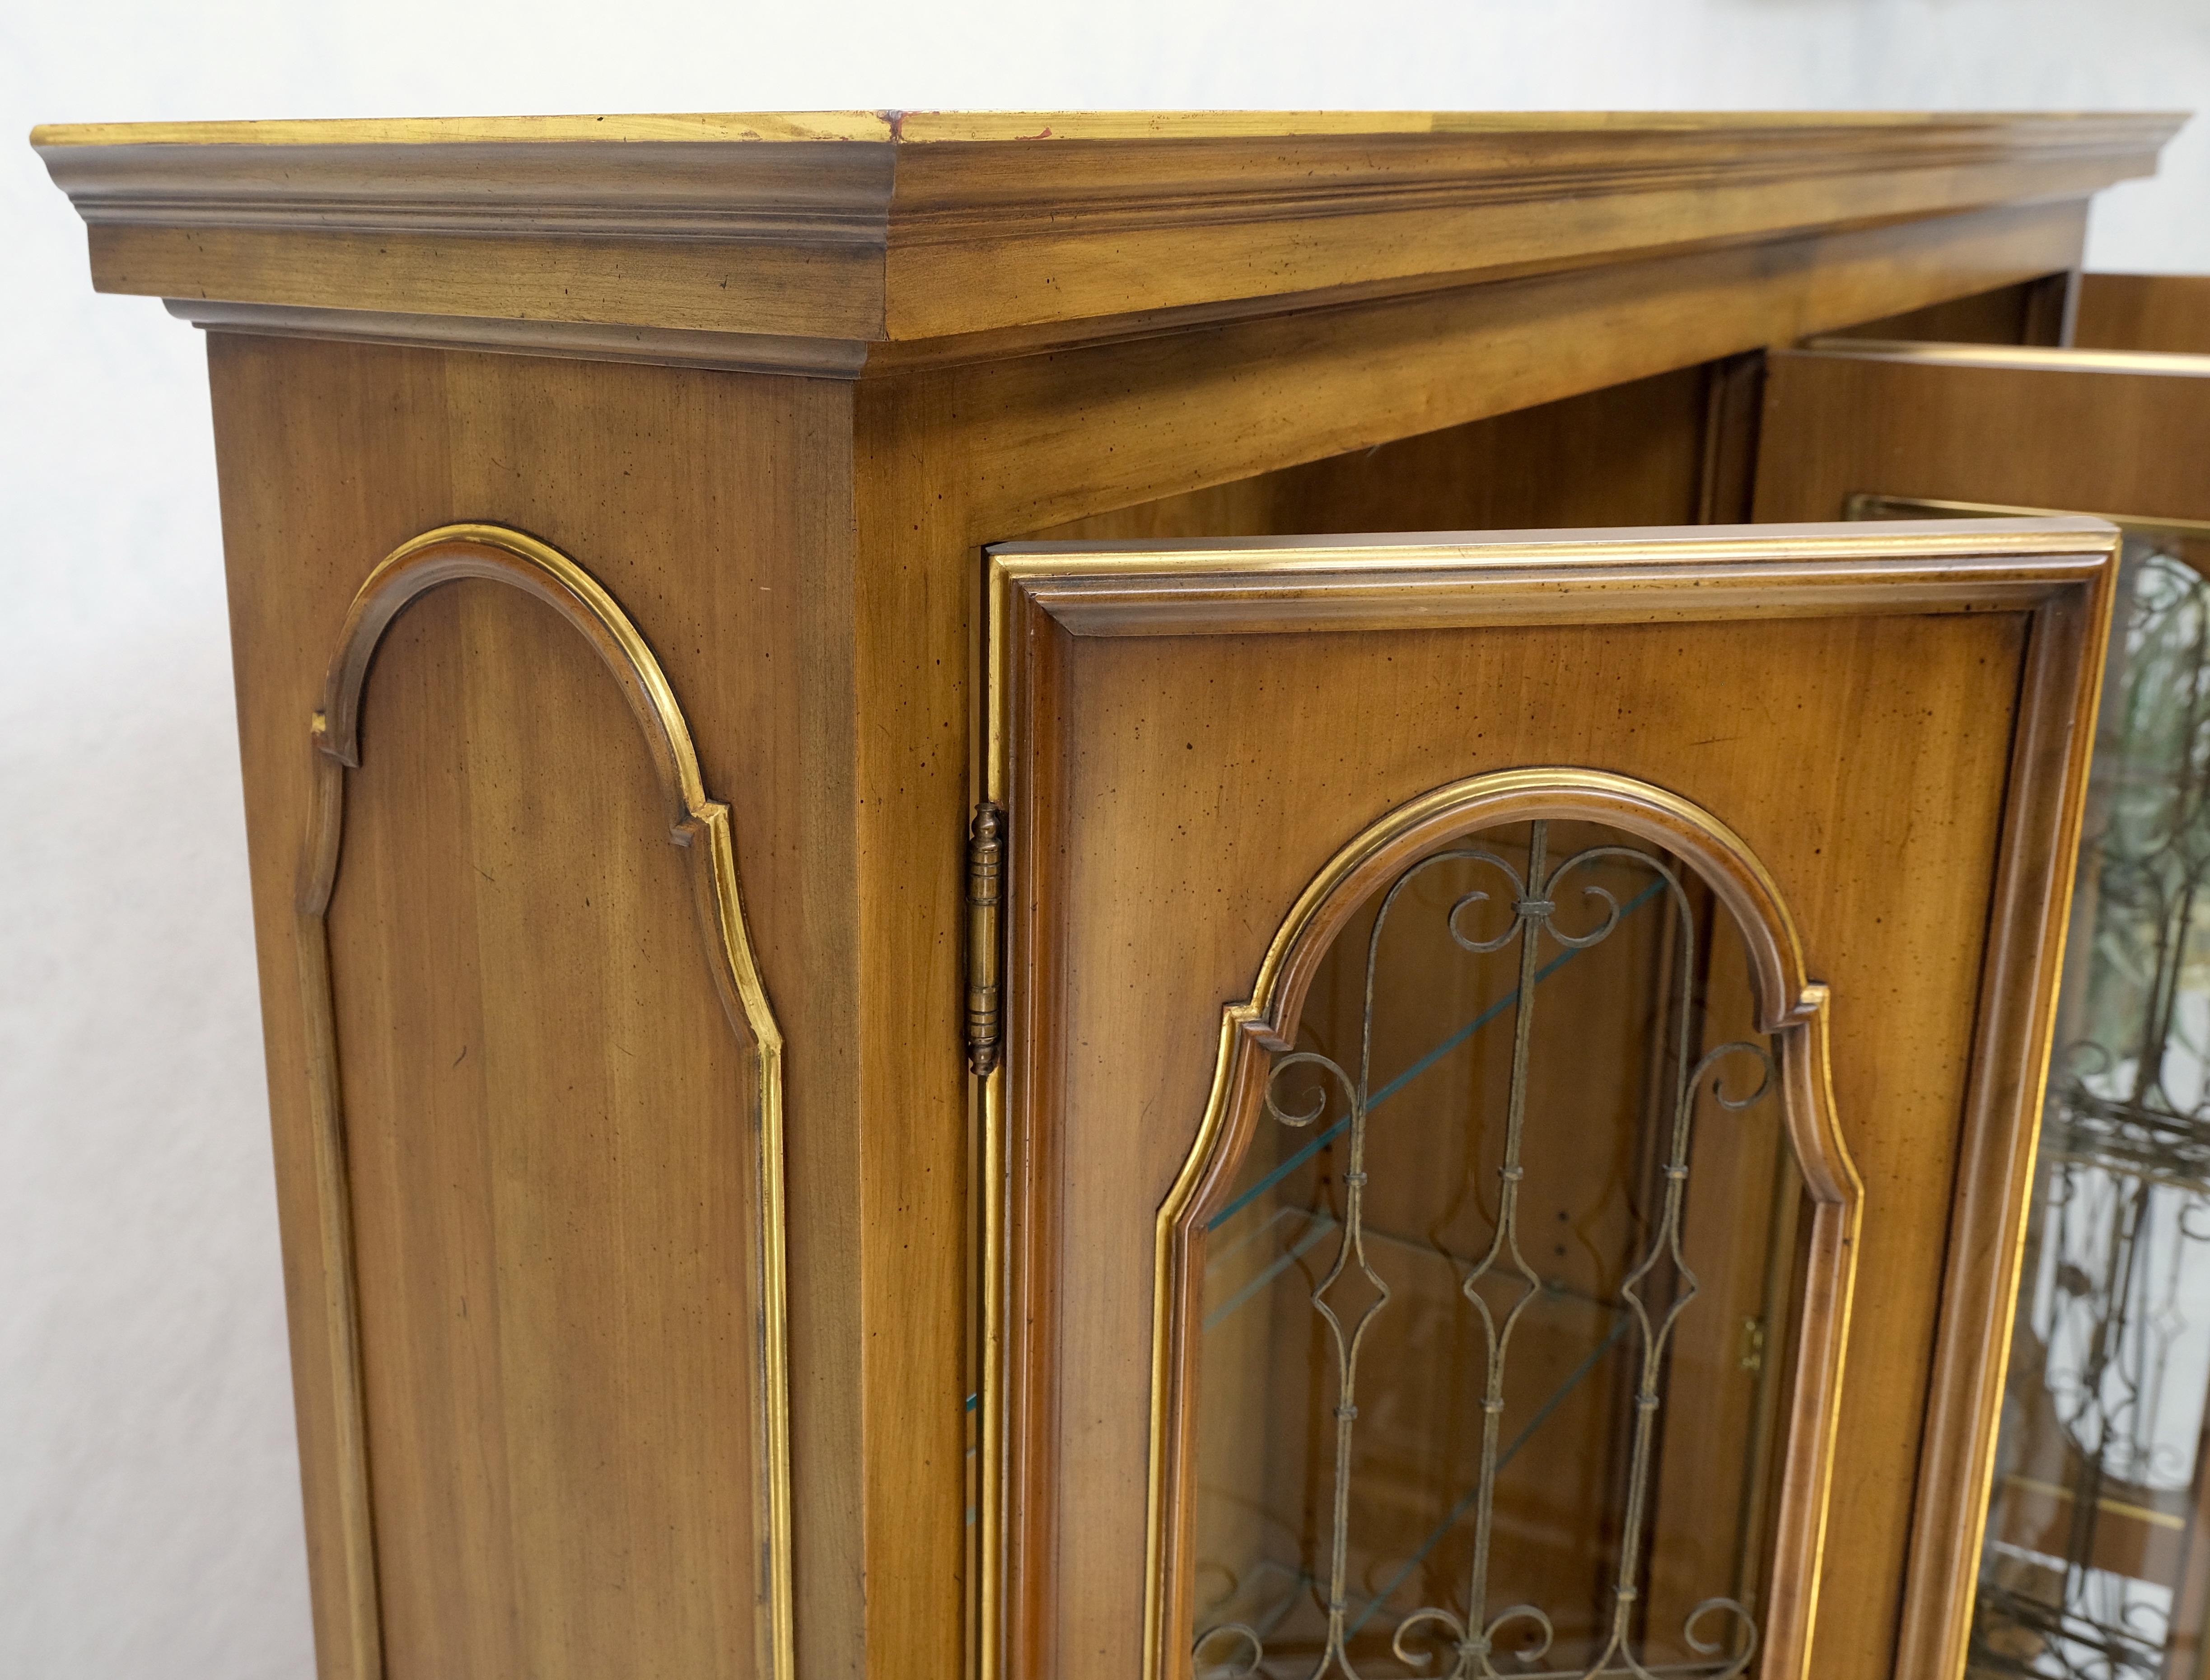 Very Fine Two Part Breakfront Sideboard Cabinet Wall Unit by John Widdicomb MINT.
Decorative forged brass window grills have hinges and can be opened to maintain and clean the glass.